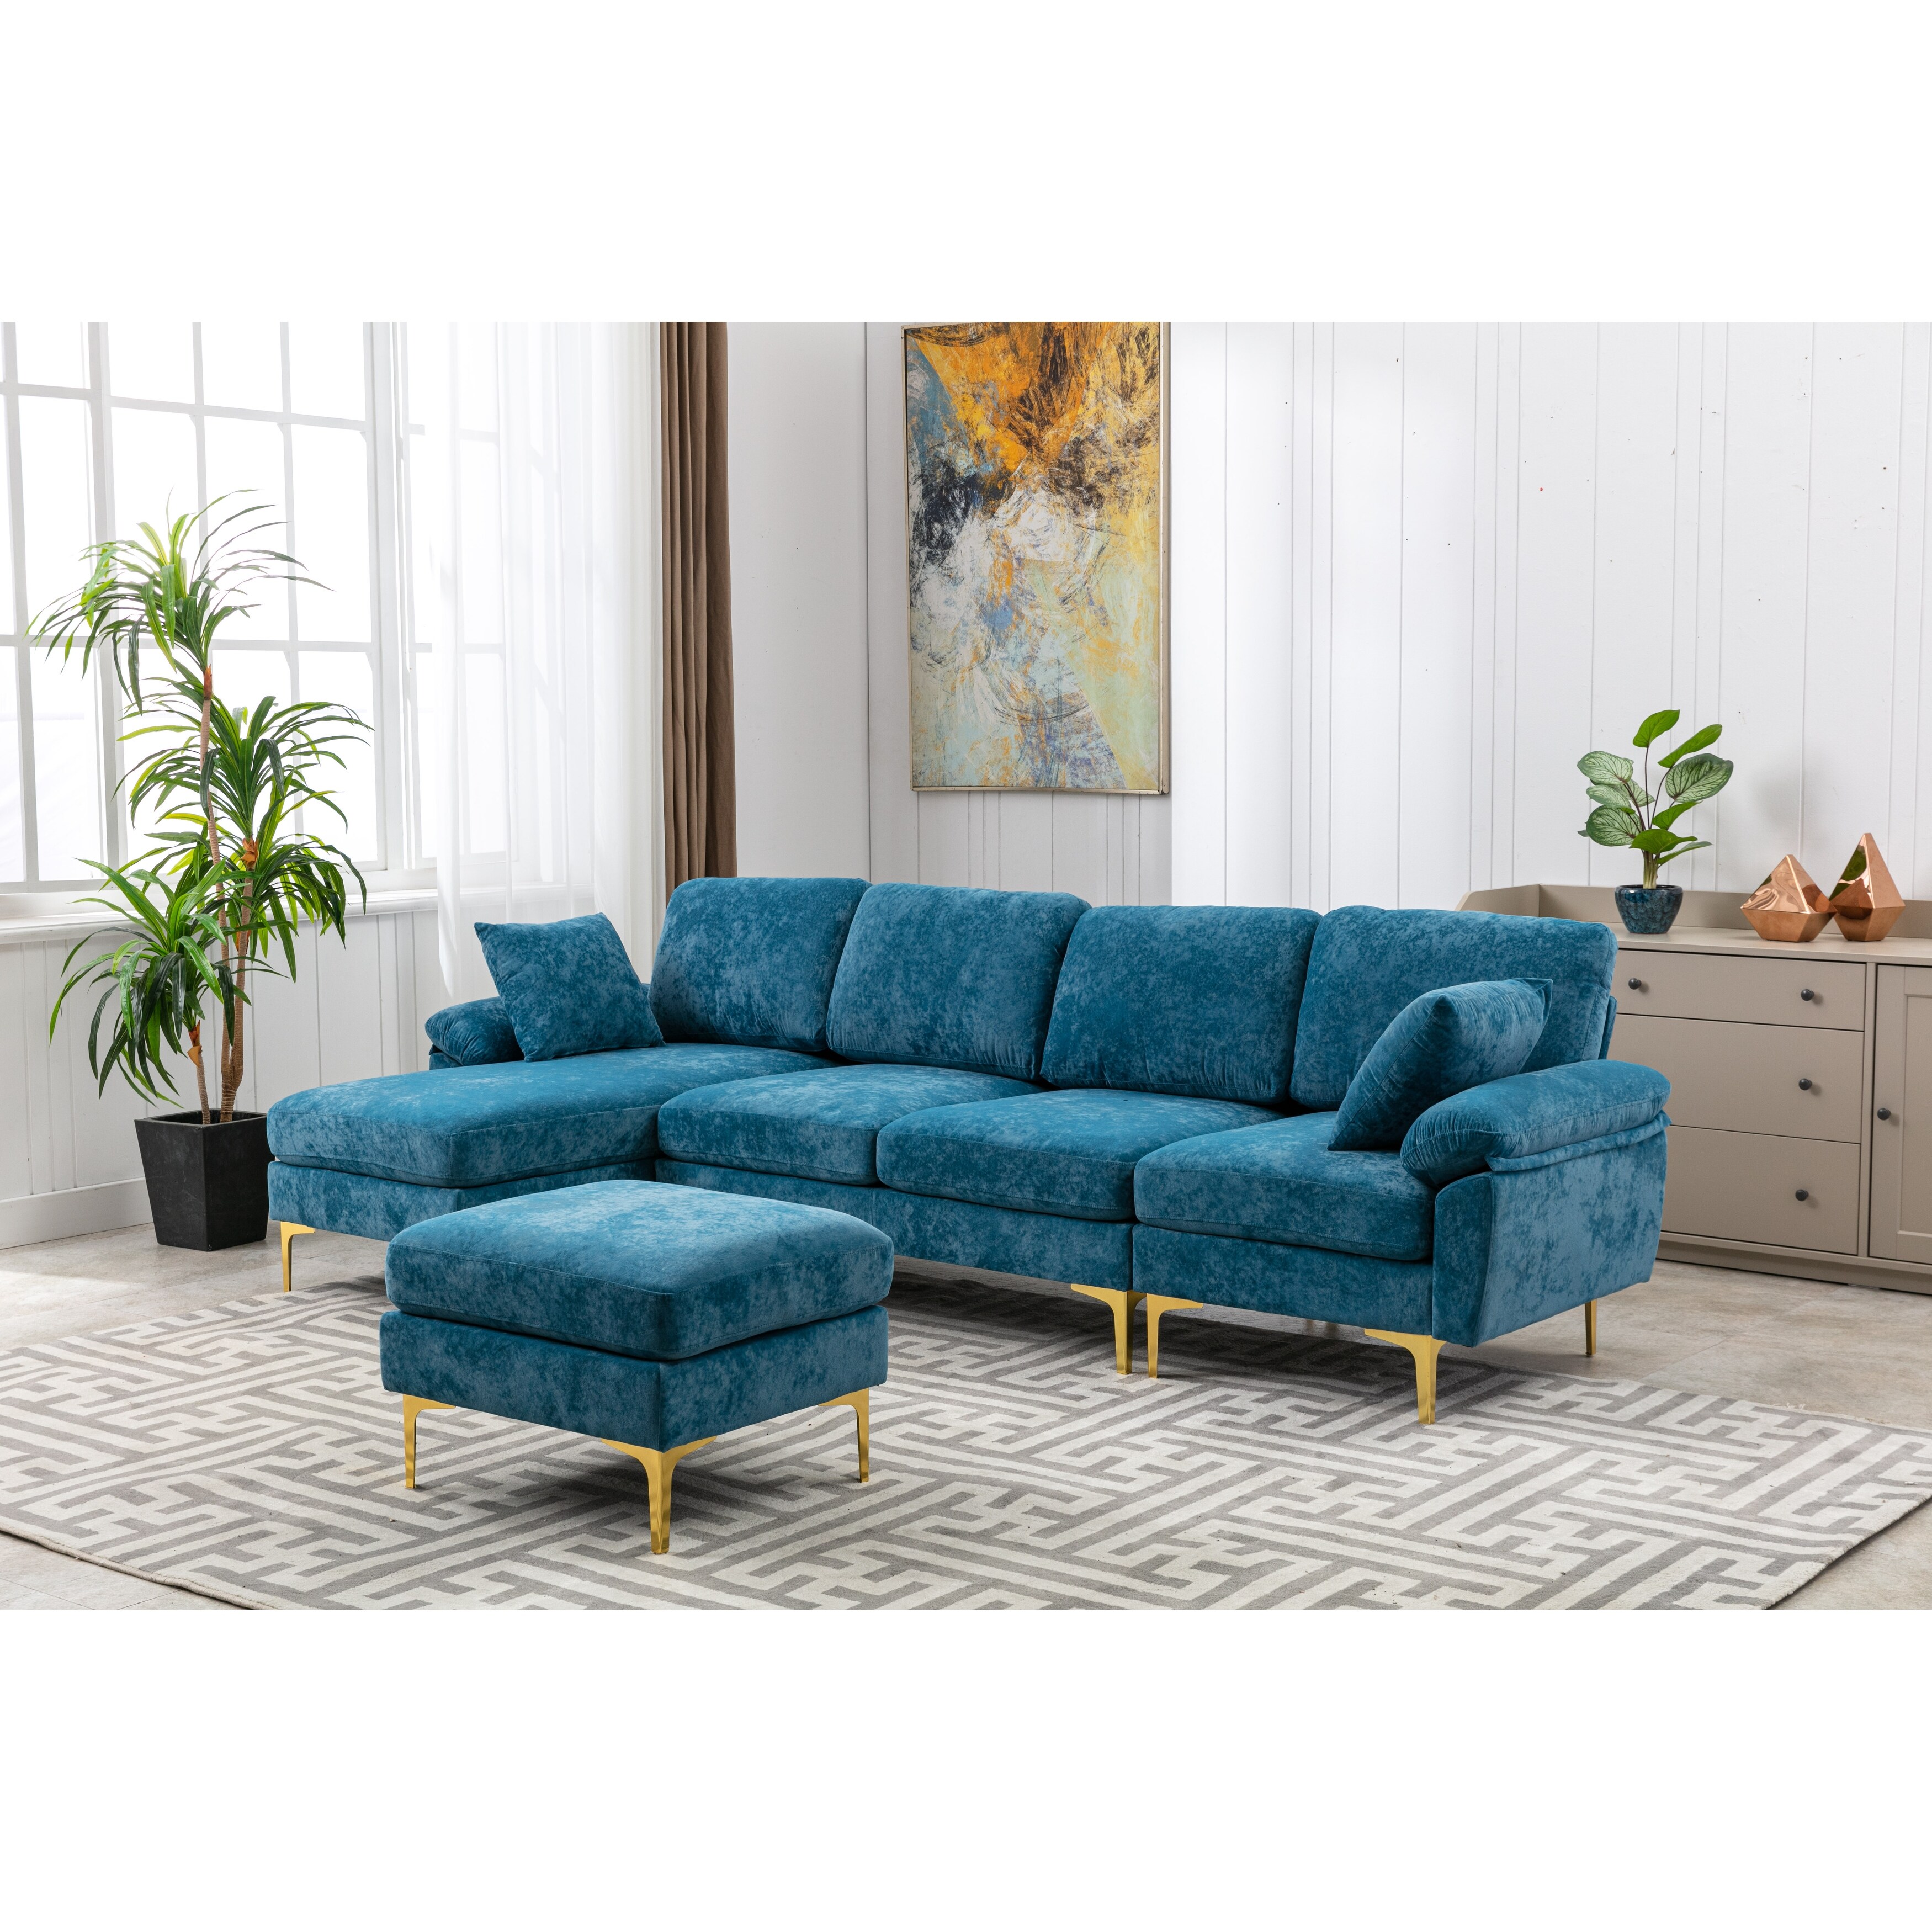 Living Room Sectional Sofa  L-shaped Upholstered Couch With Movable Ottoman  Convertible Modular Sofa With Gold Metal Legs